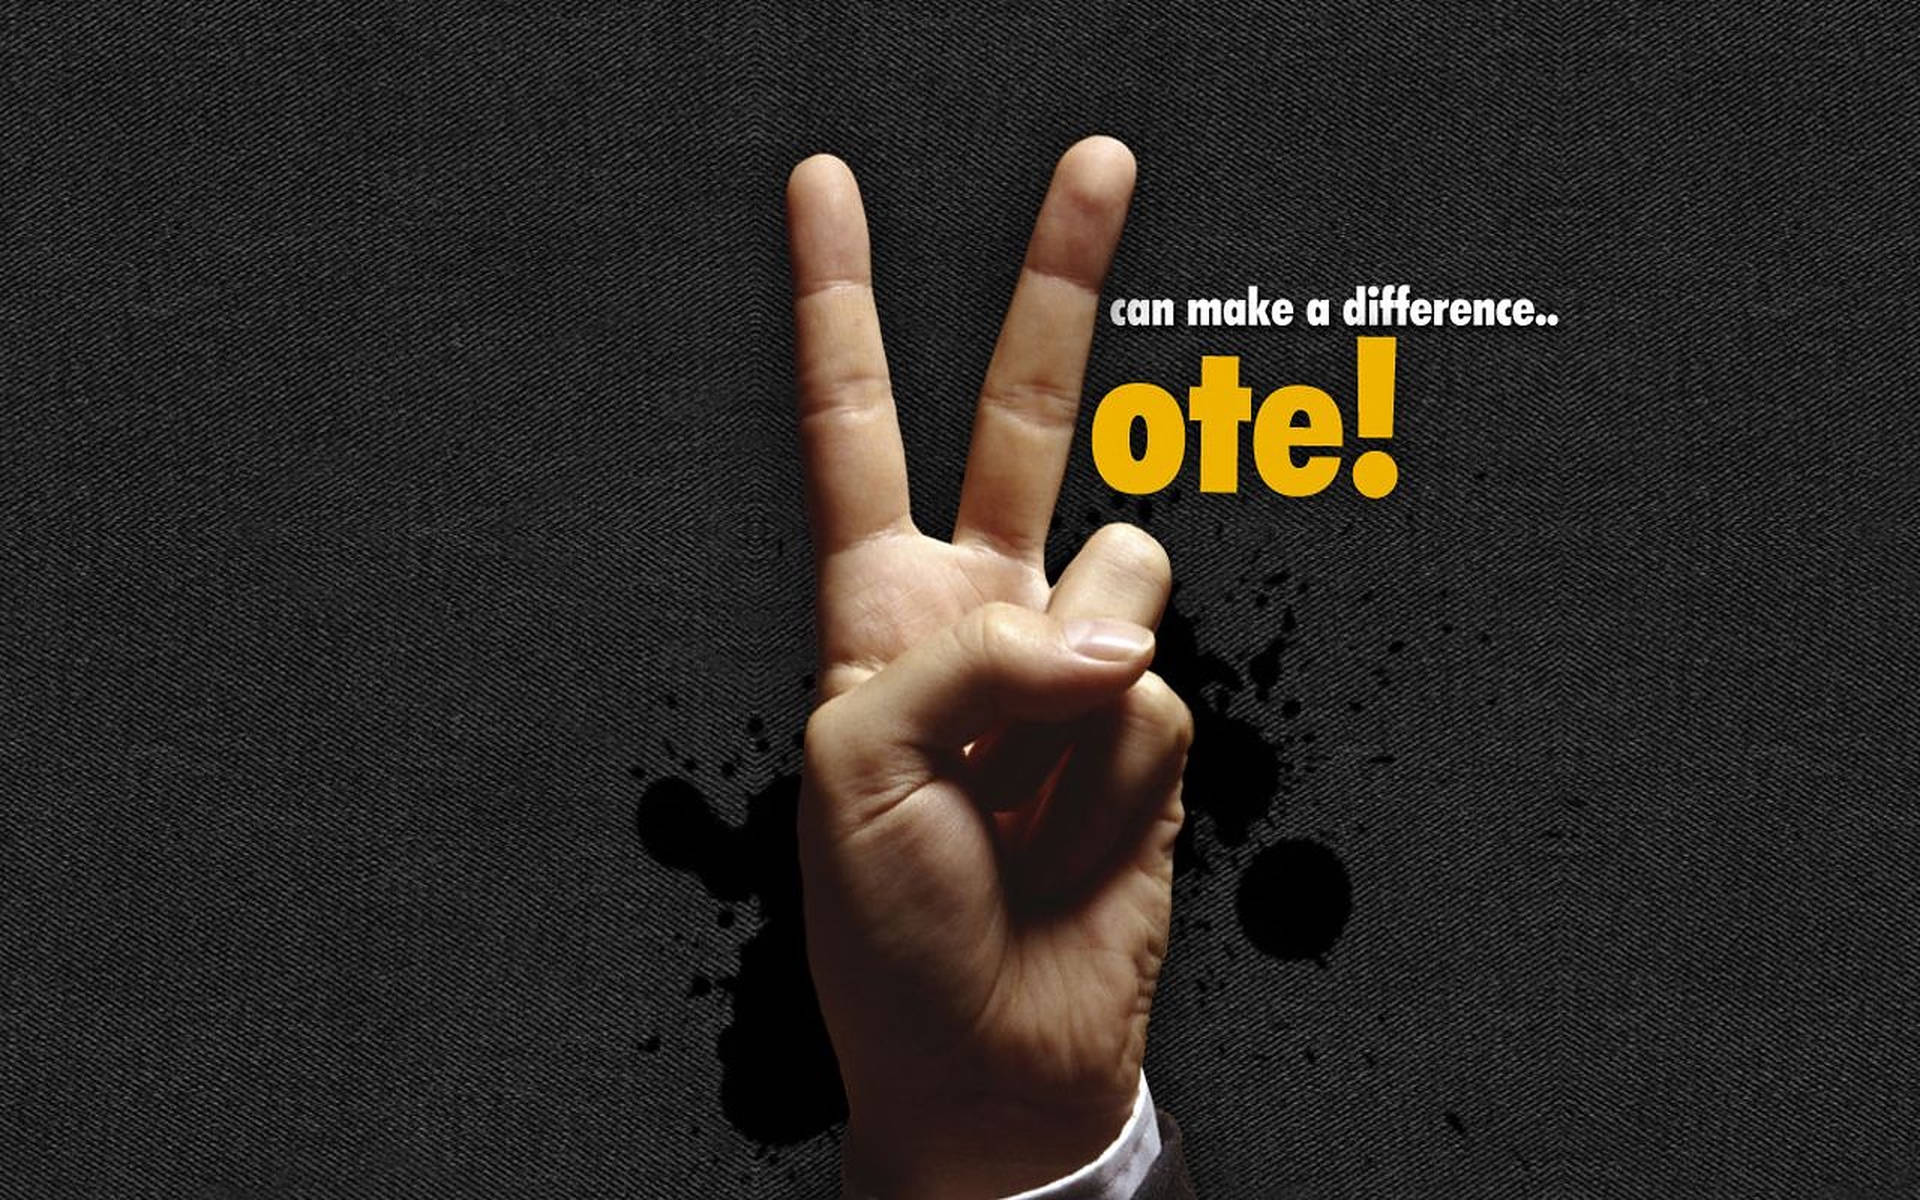 Hand Sign Election Poster